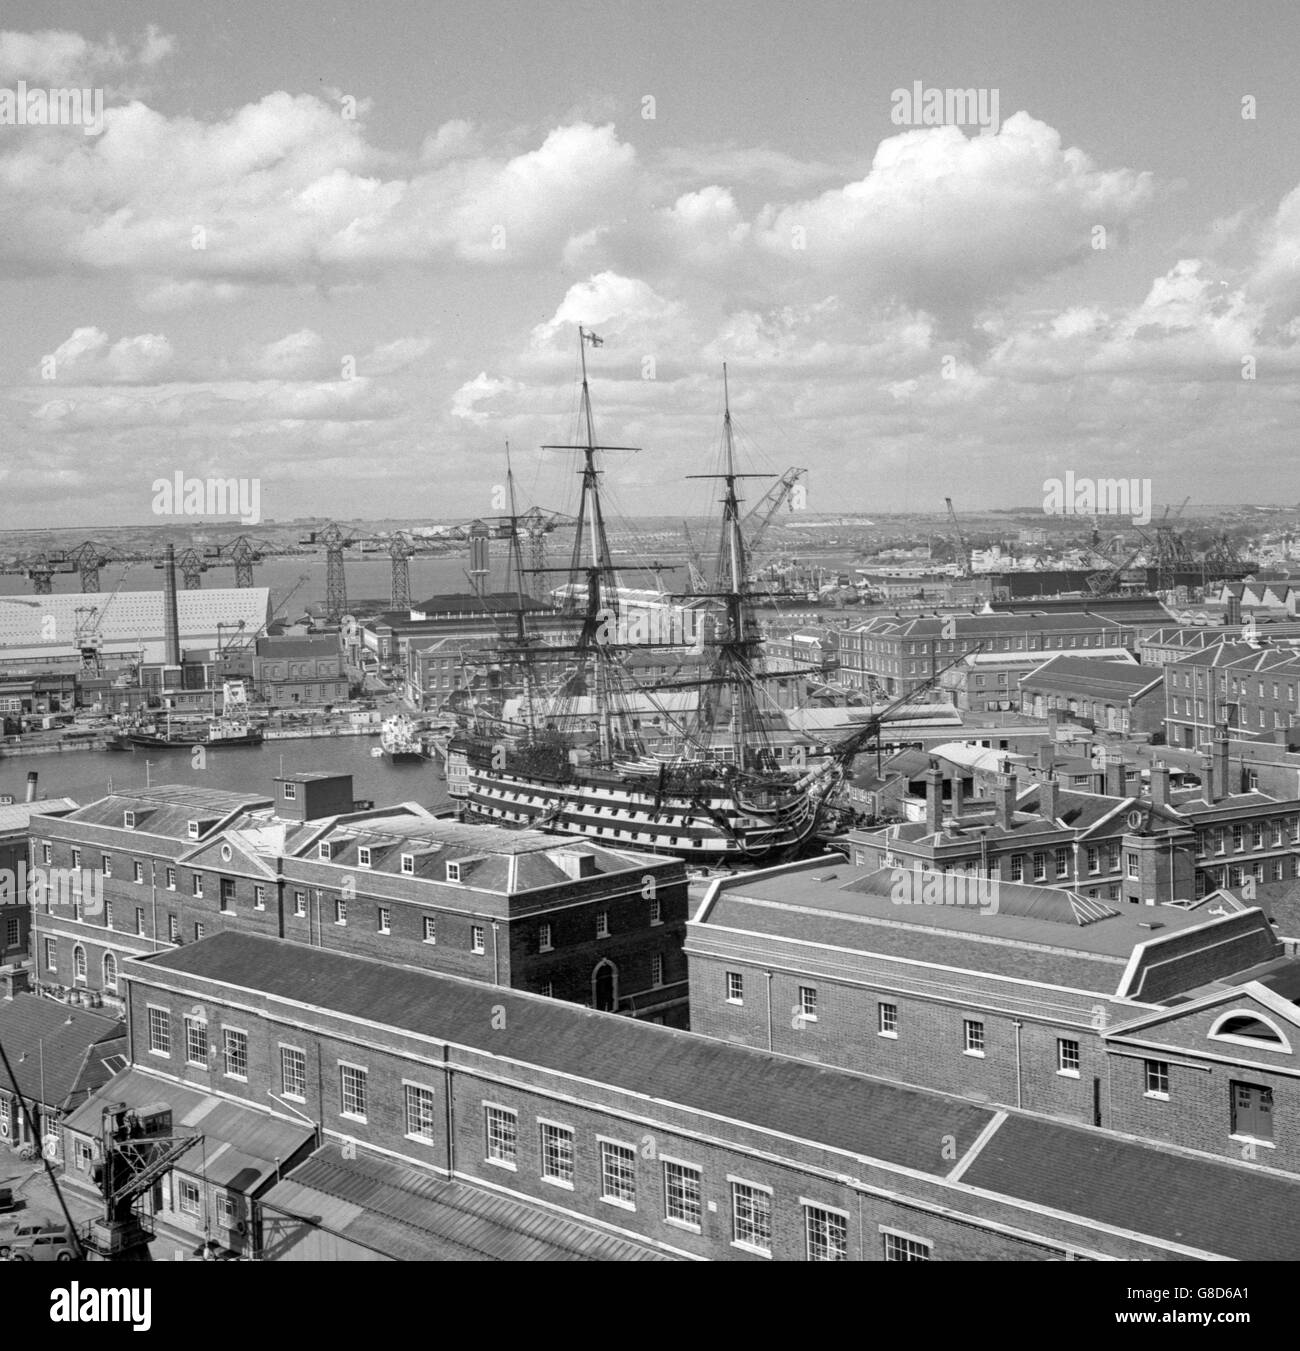 The wooden walls of 200 years ago stand out as a shrine of the nation's naval tradition amid the sprawl of a modern naval base in this picture of HMS Victory in Portsmouth. Stock Photo